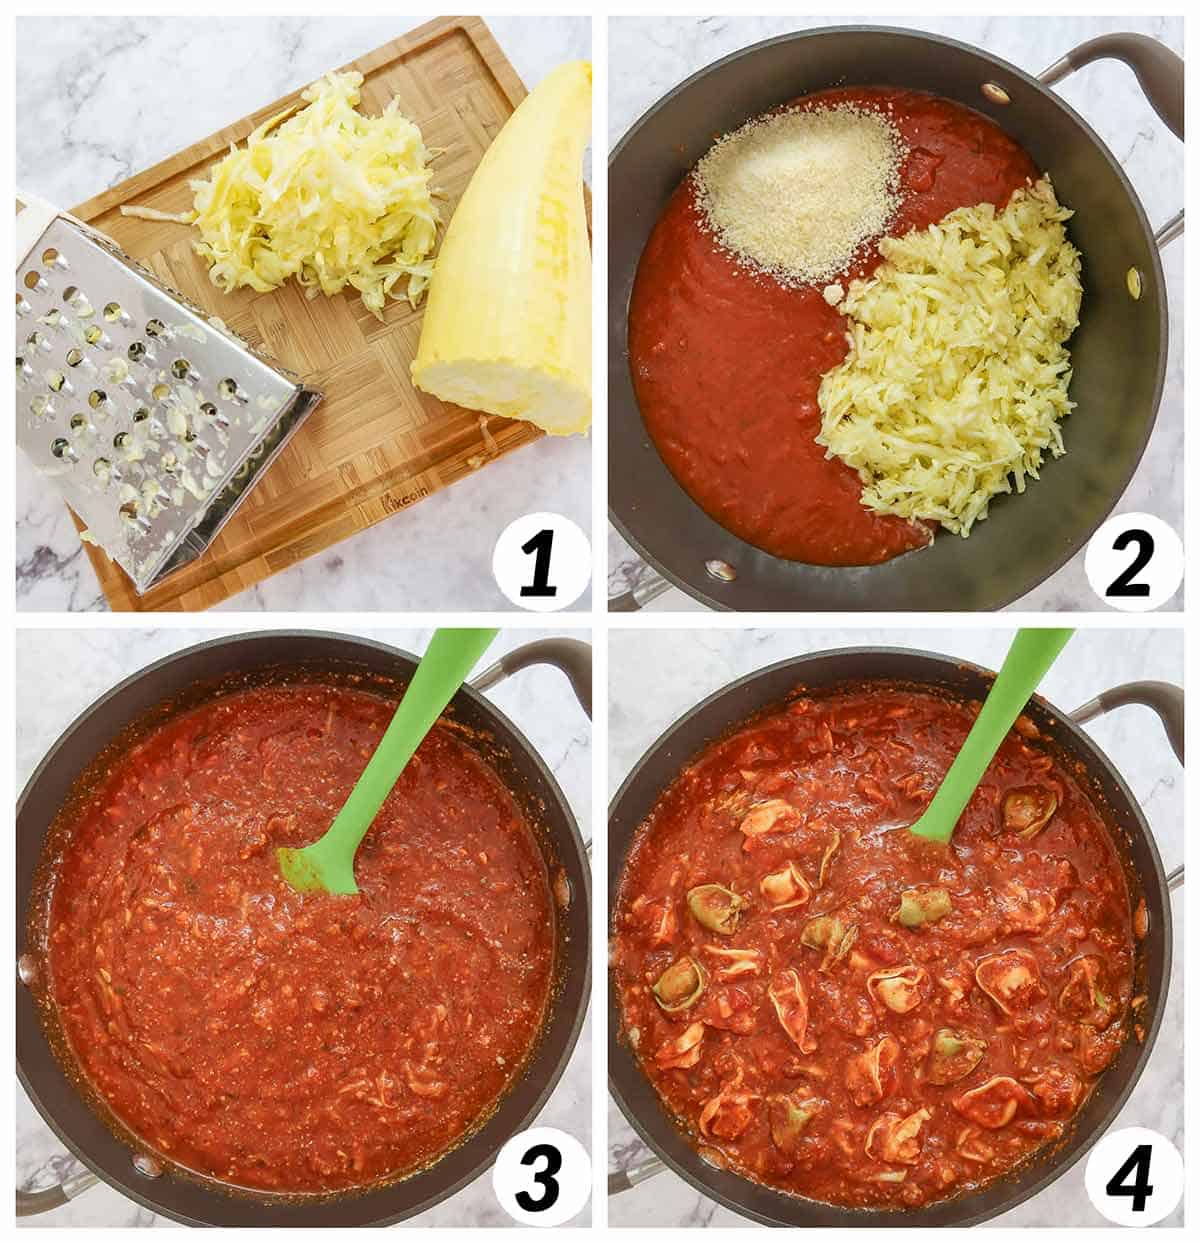 Four panel grid of process shots- preparing the zucchini, combining ingredients in a pot, and cooking.